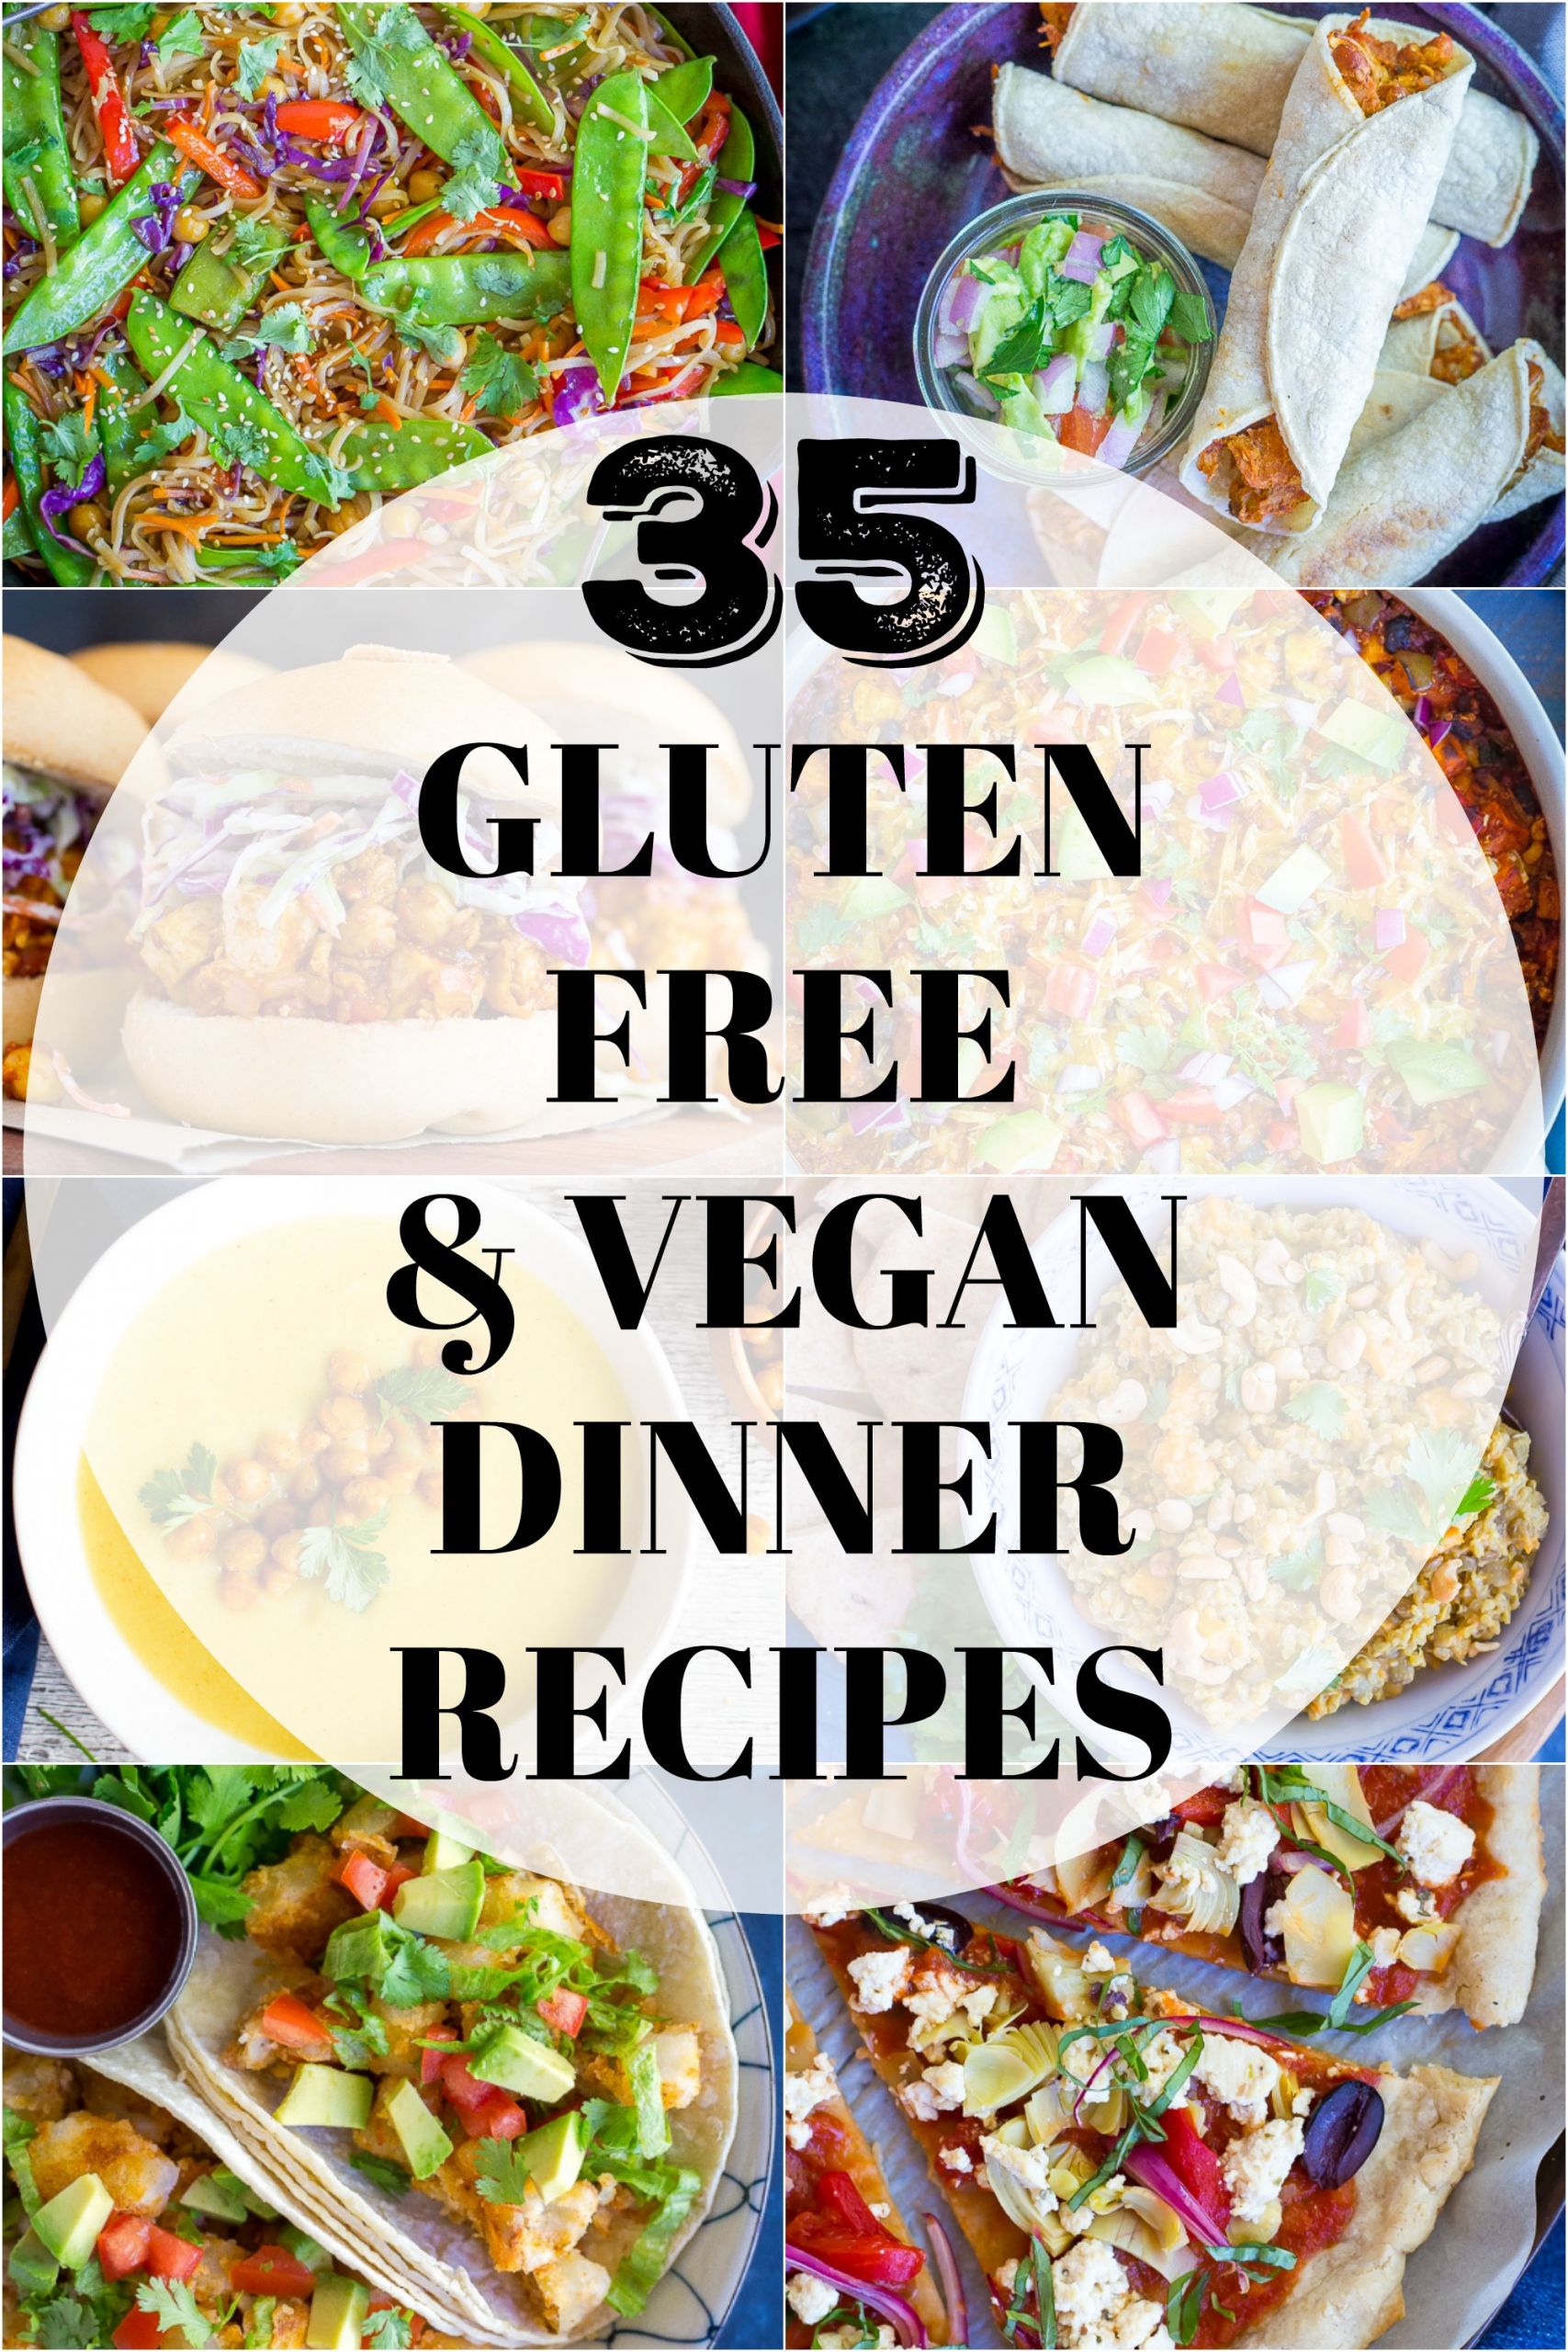 Gluten Dairy And Soy Free Recipes
 35 Vegan & Gluten Free Dinner Recipes She Likes Food